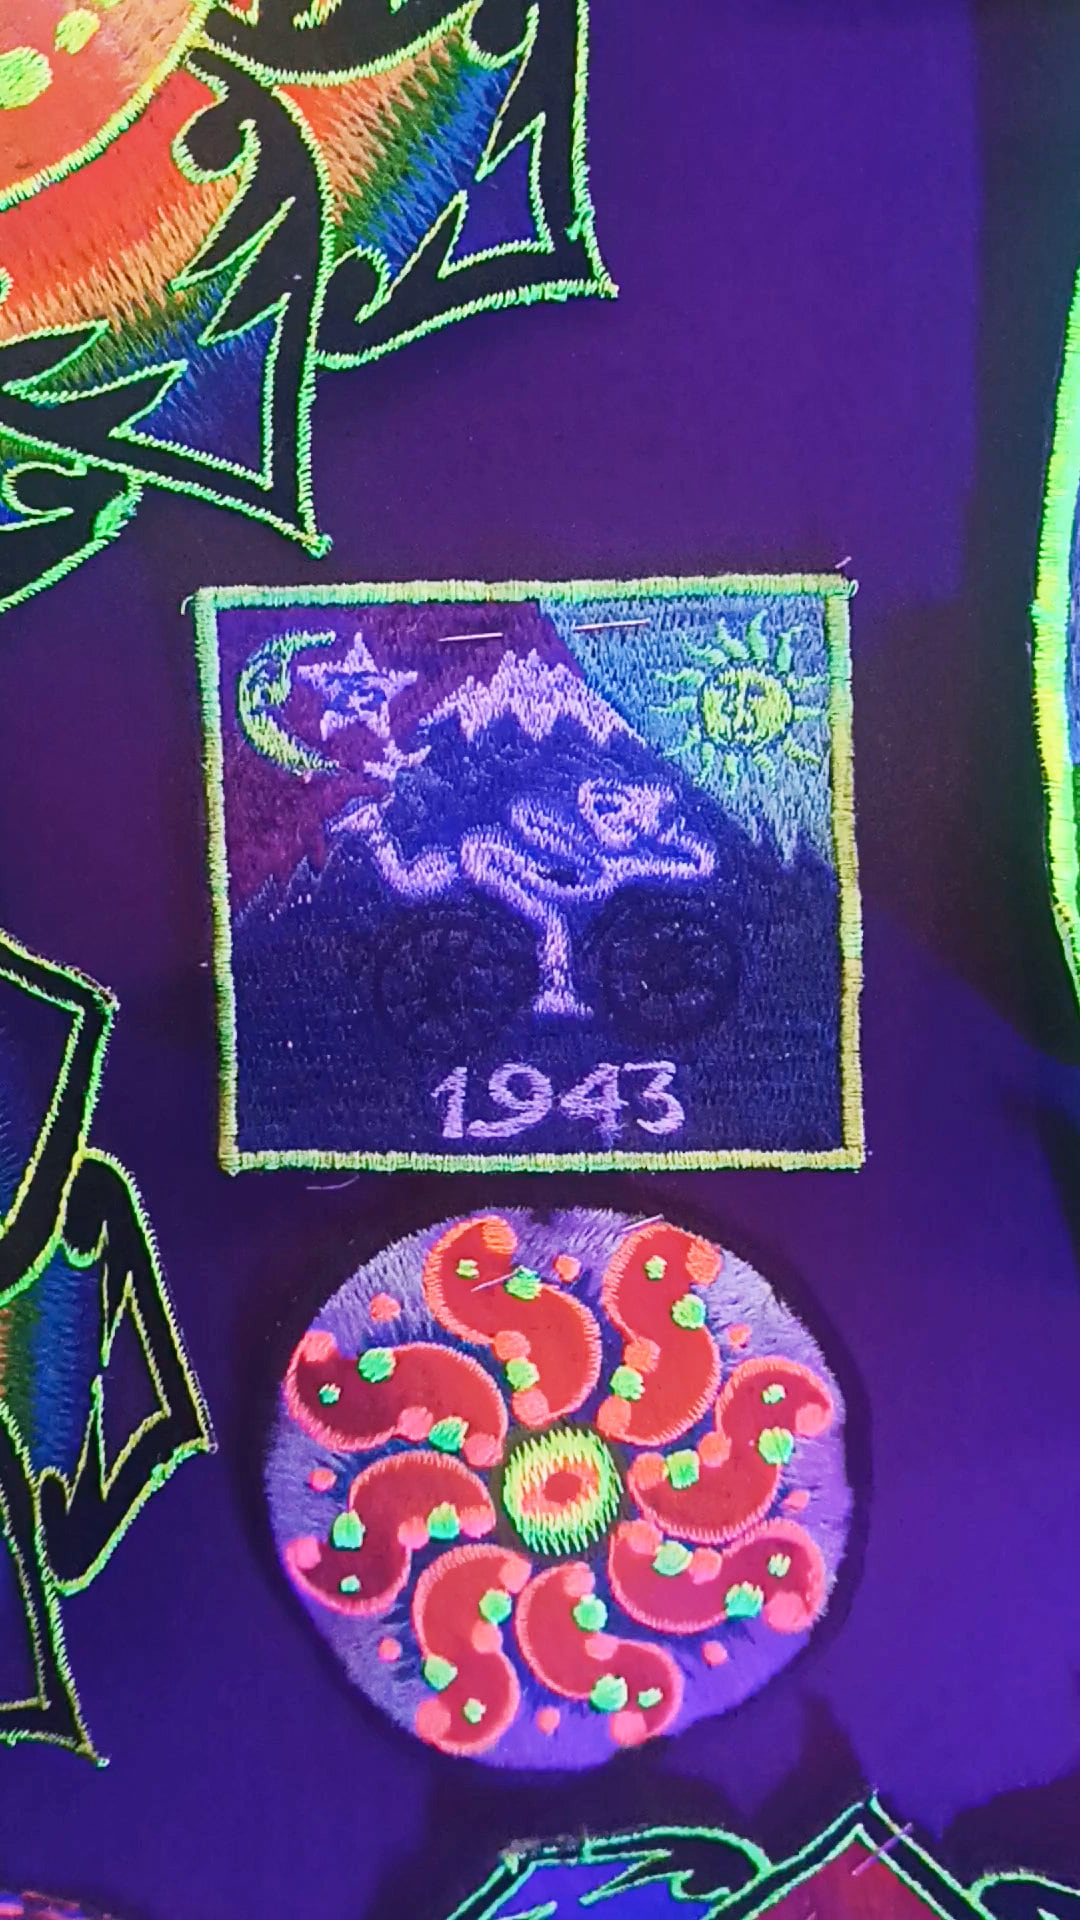 Blue Bicycle Day LSD Patch blacklight vintage embroidery Albert Hofmann 1943 Psychedelic  Hippie Visionary Drug Cosmic Healing Medicine